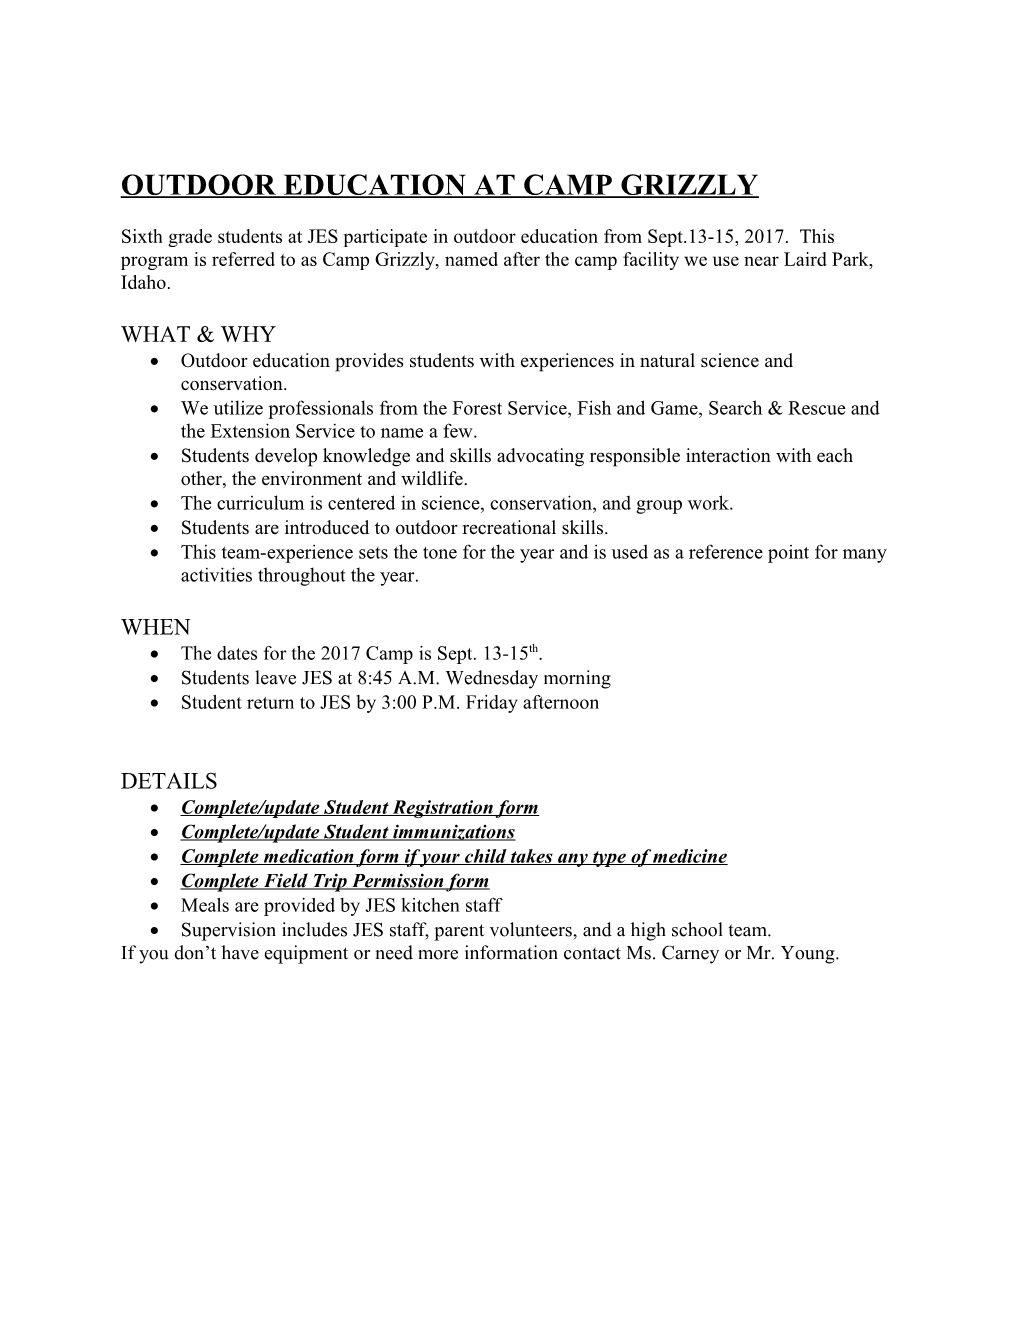 Outdoor Education at Campgrizzly